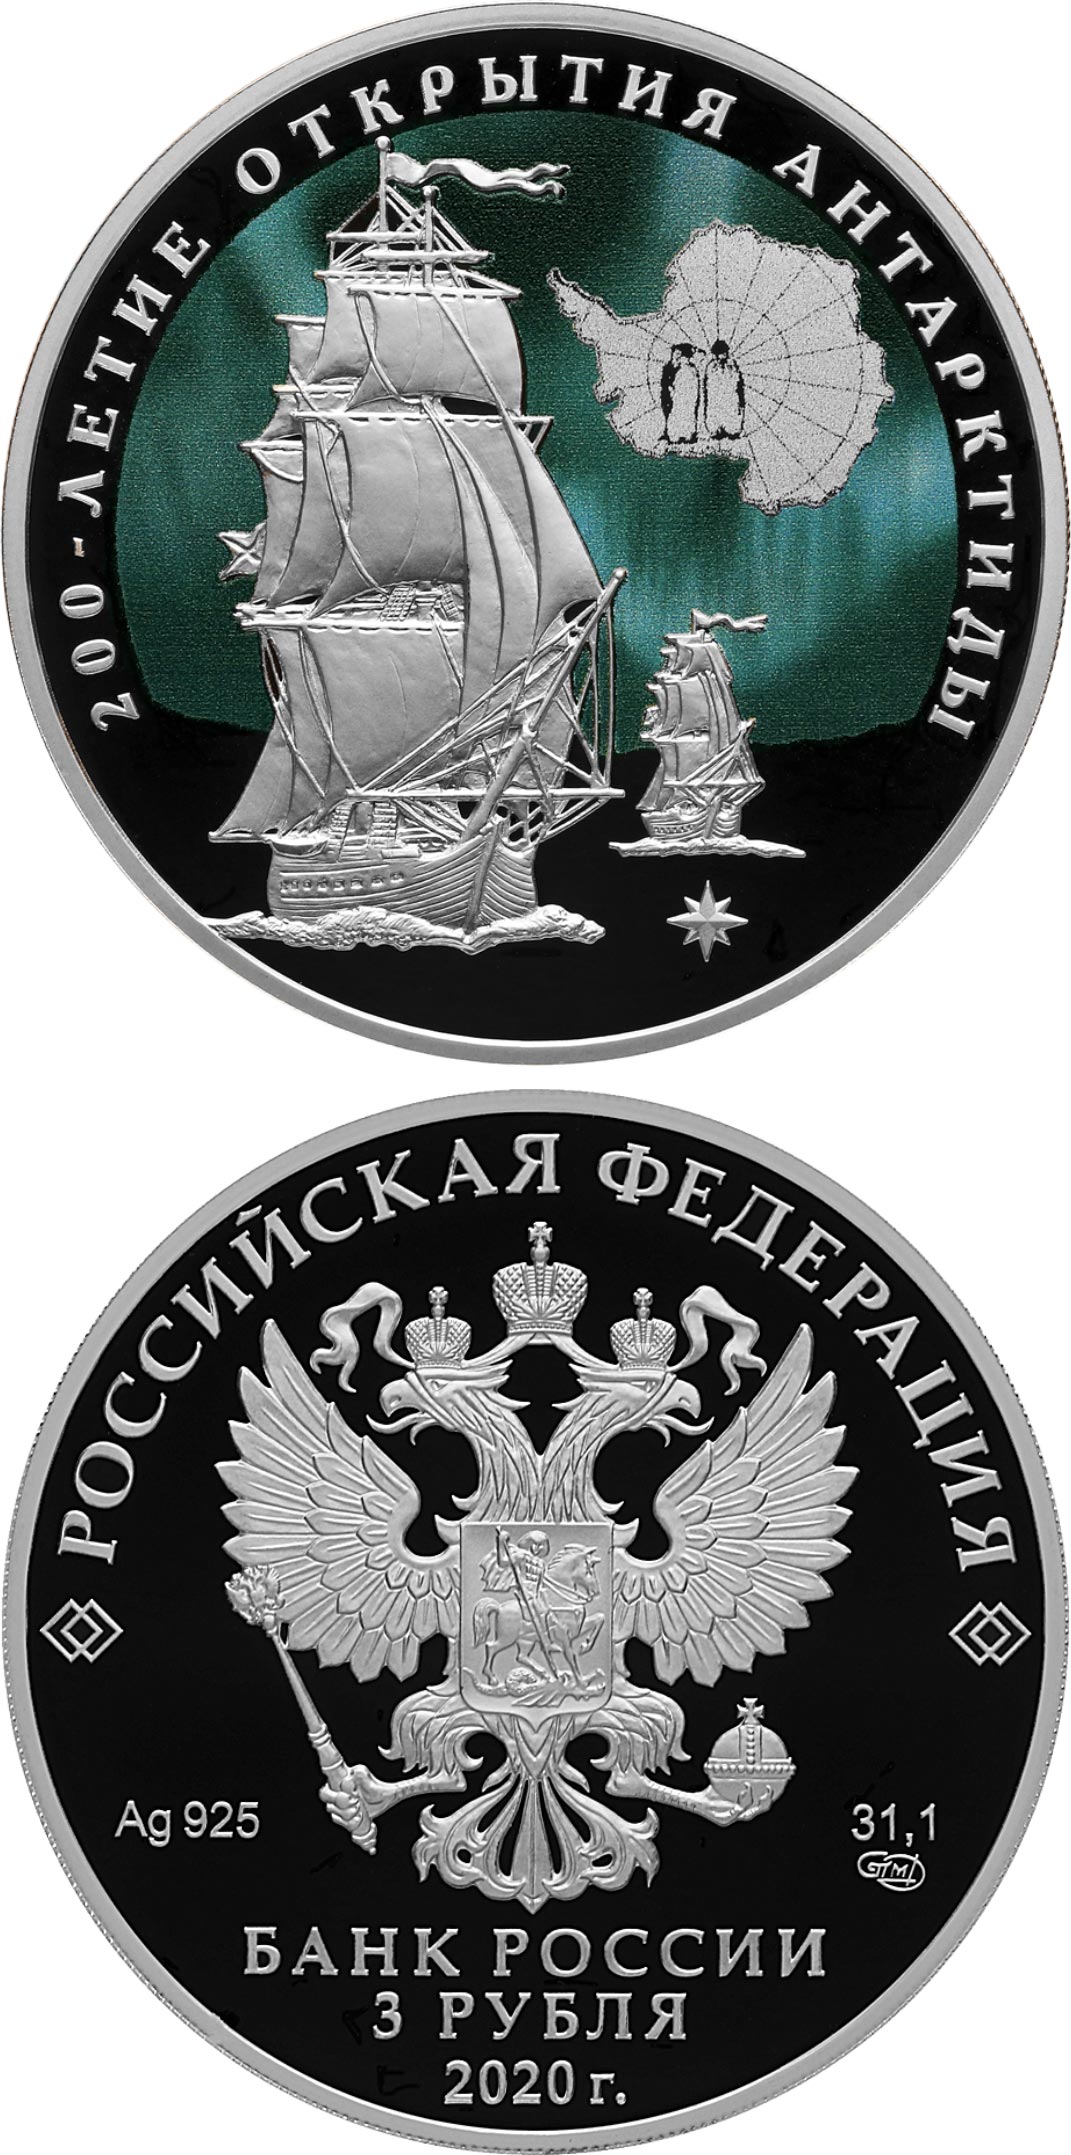 Image of 3 rubles coin - 200th Anniversary of the Discovery of Antarctica by Russian Seamen Faddey F. Bellingshausen and Michail P. Lazarev | Russia 2020.  The Silver coin is of Proof quality.